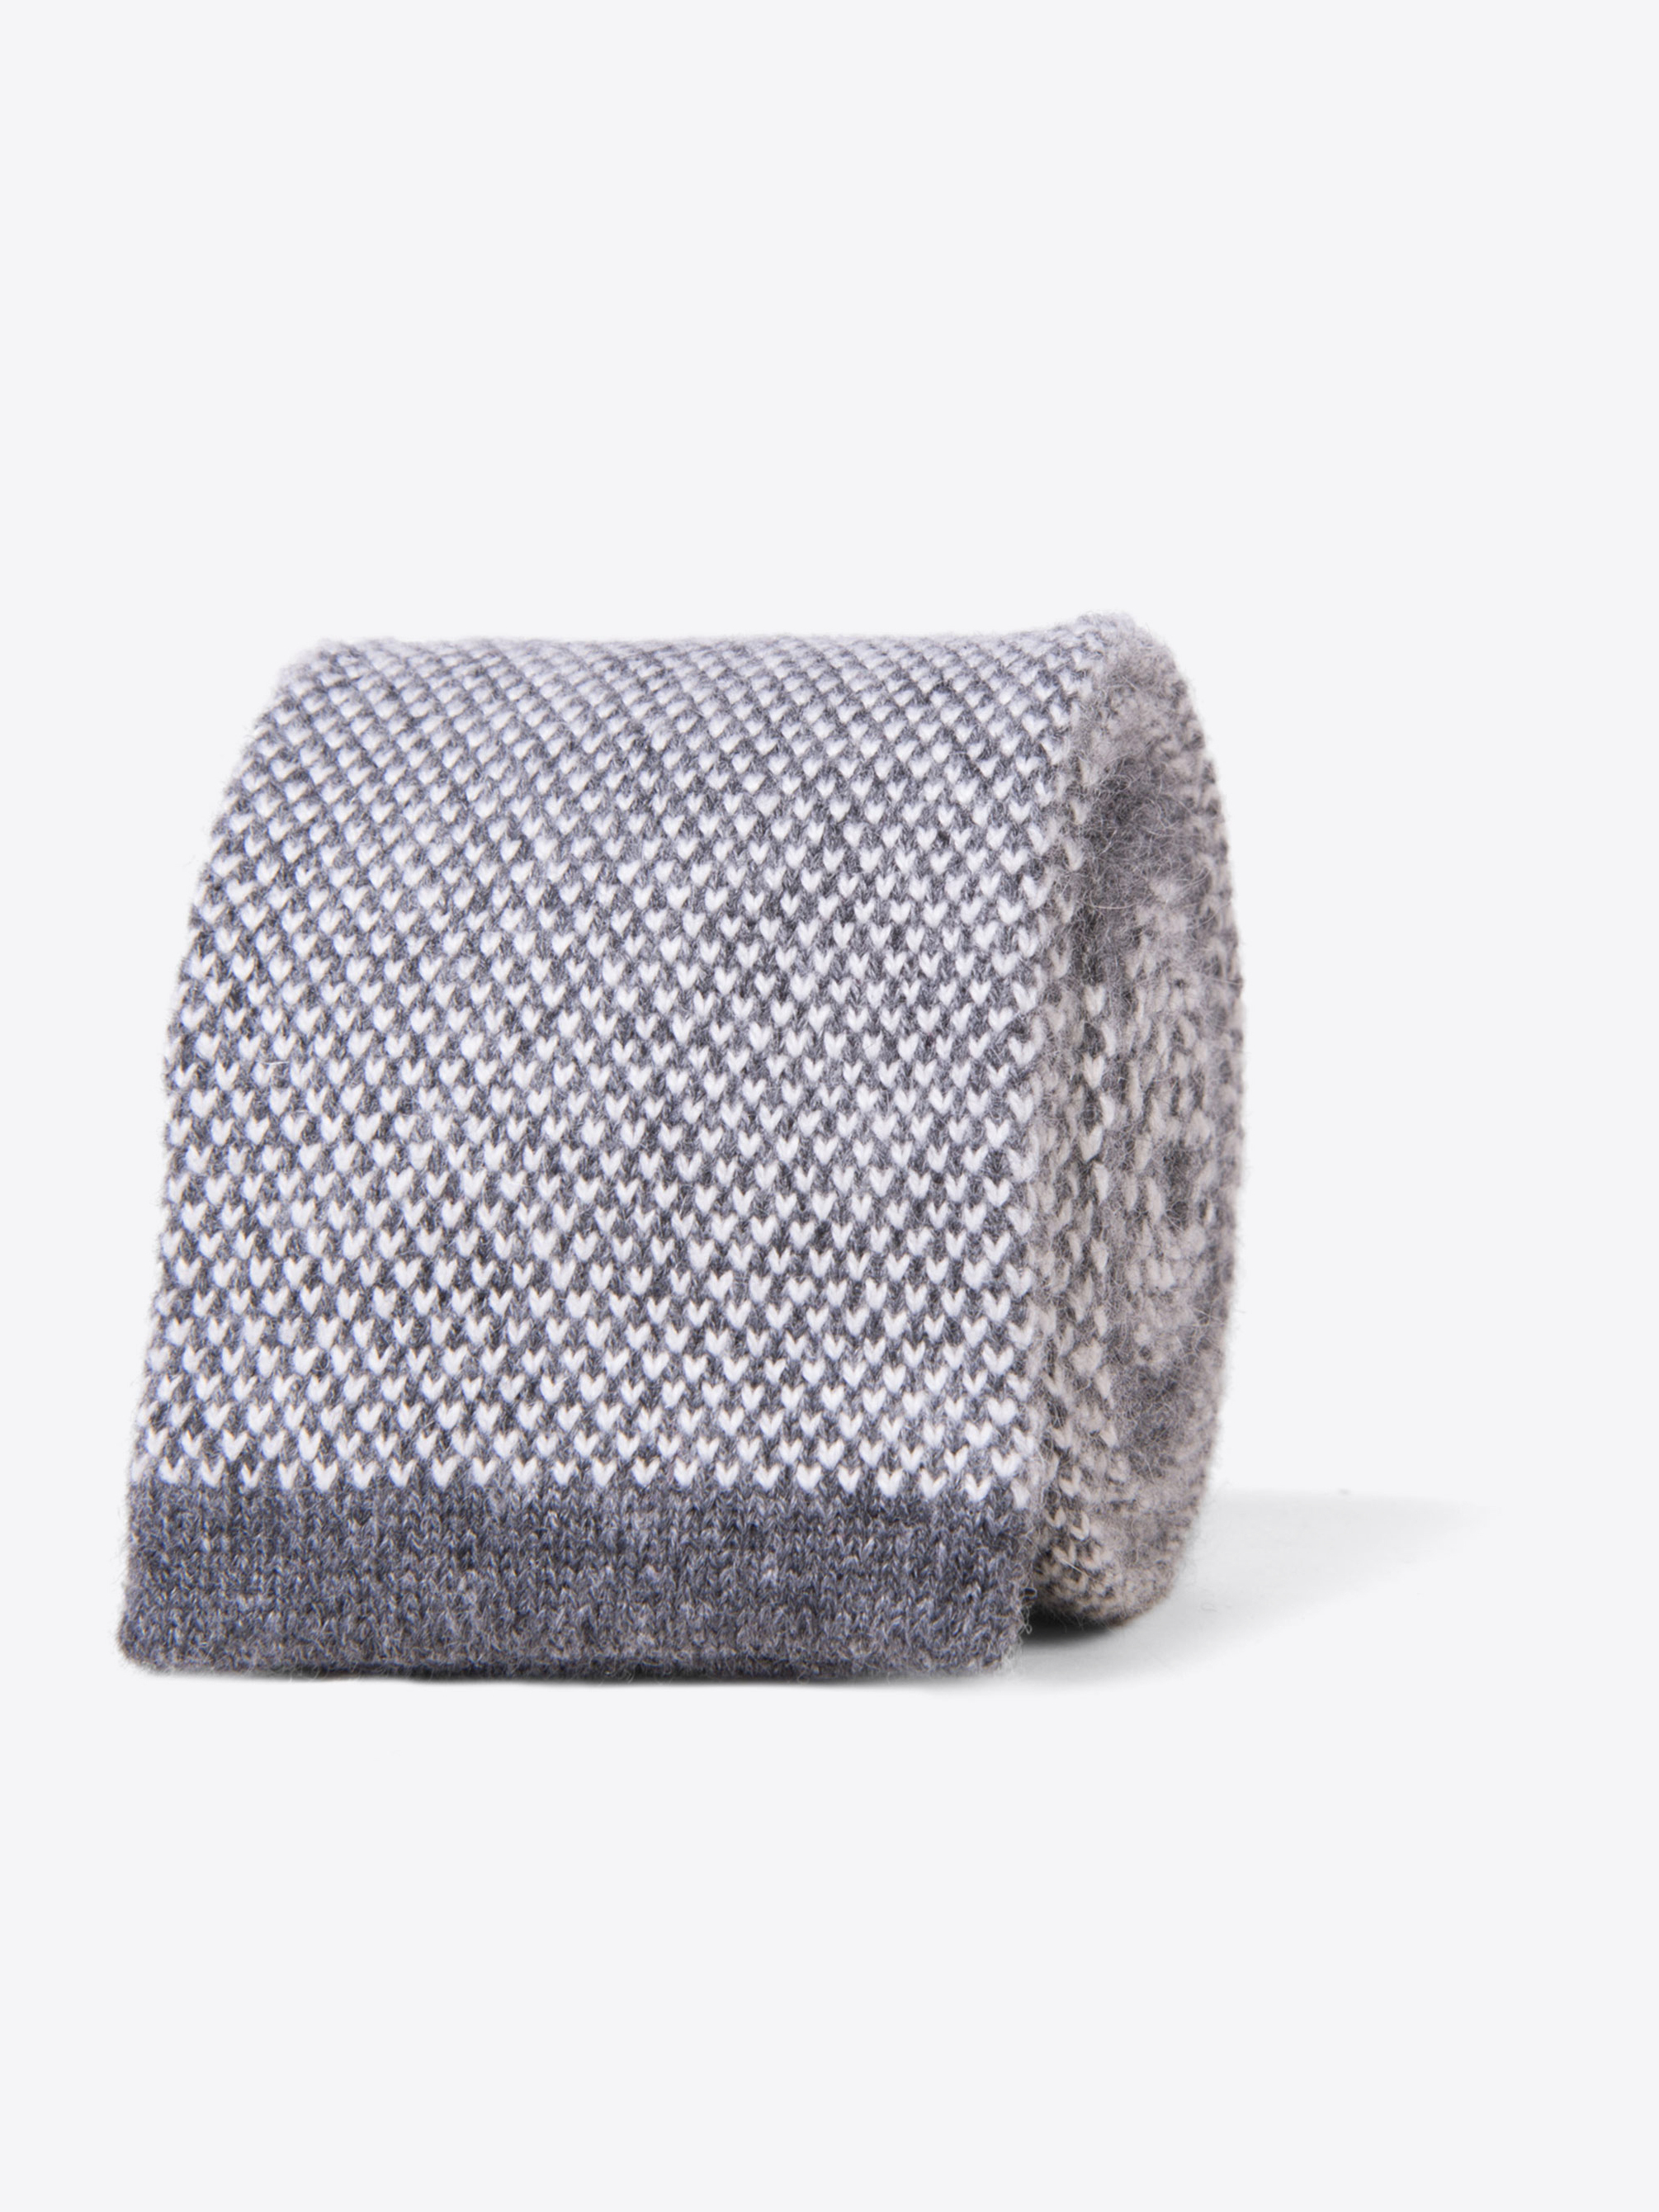 Zoom Image of Torino Charcoal Cashmere Knit Tie